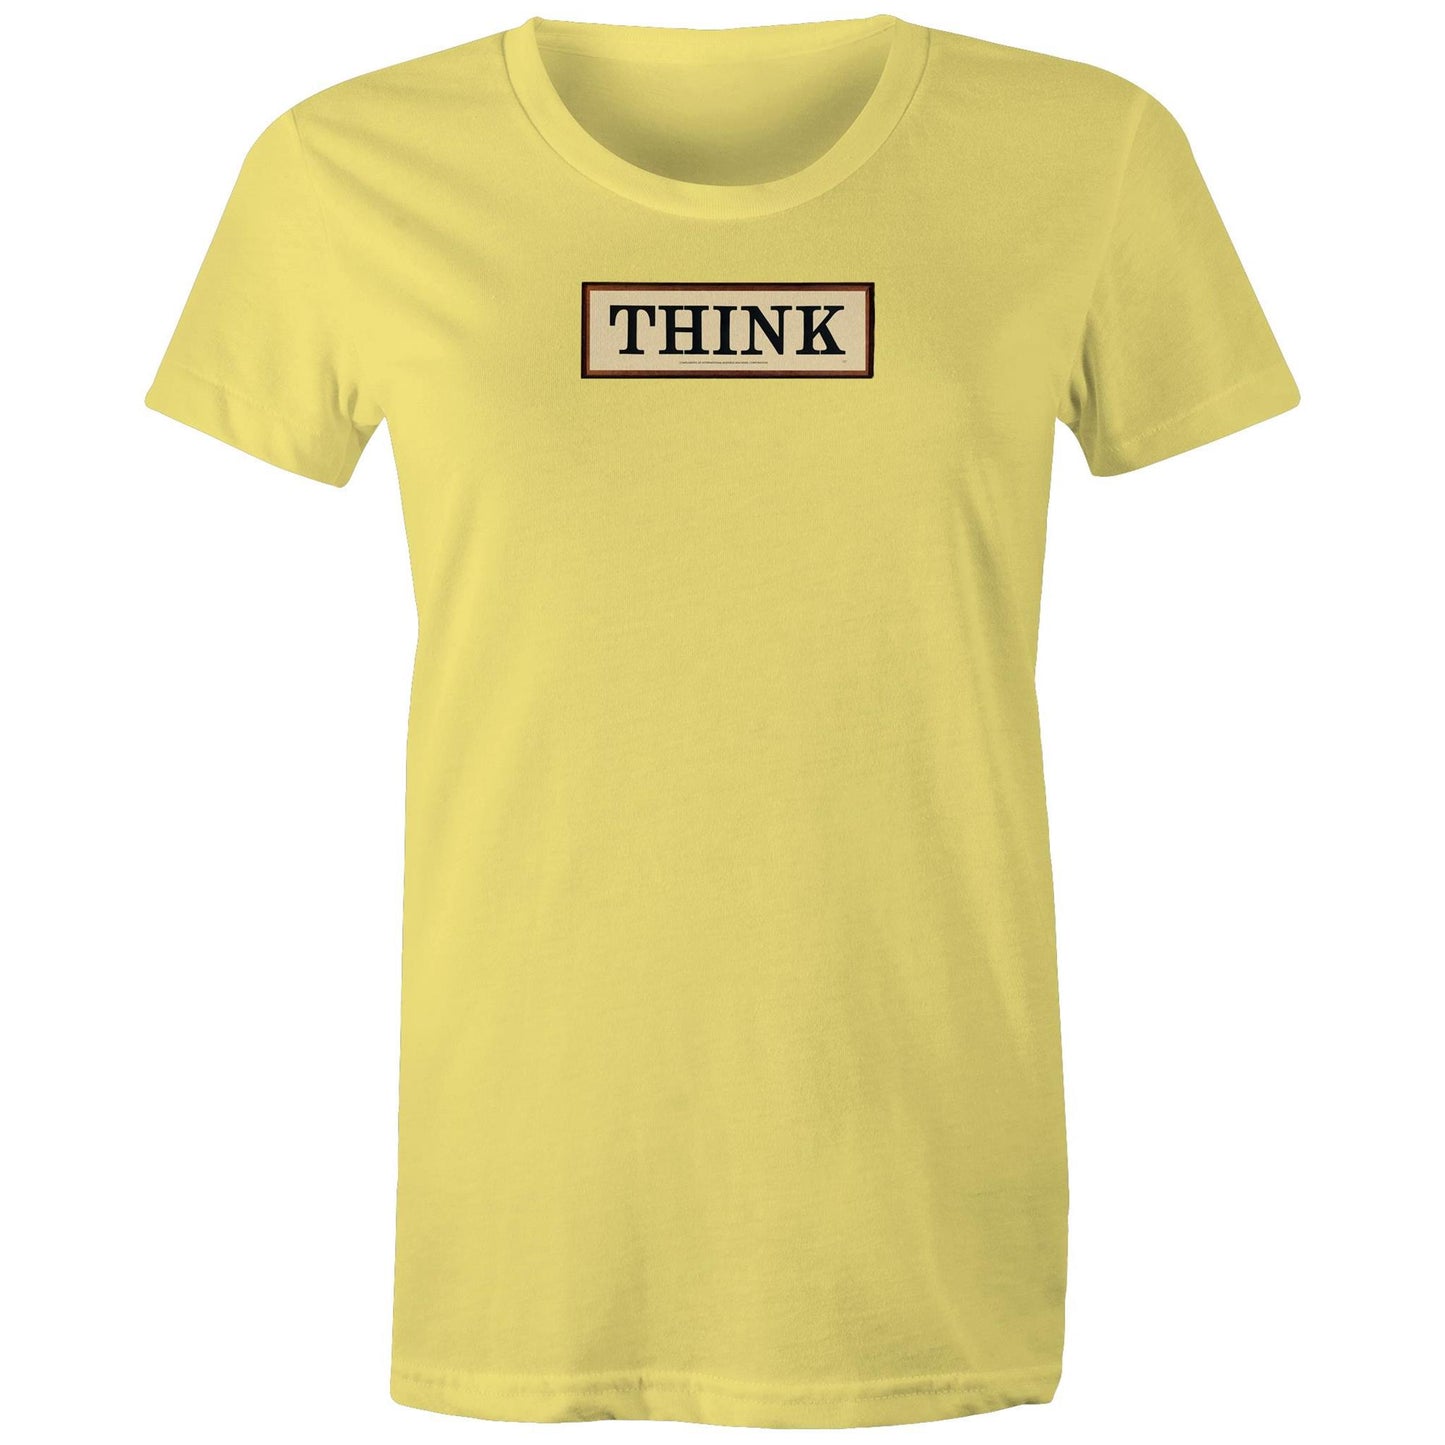 THINK Sign T Shirts for Women